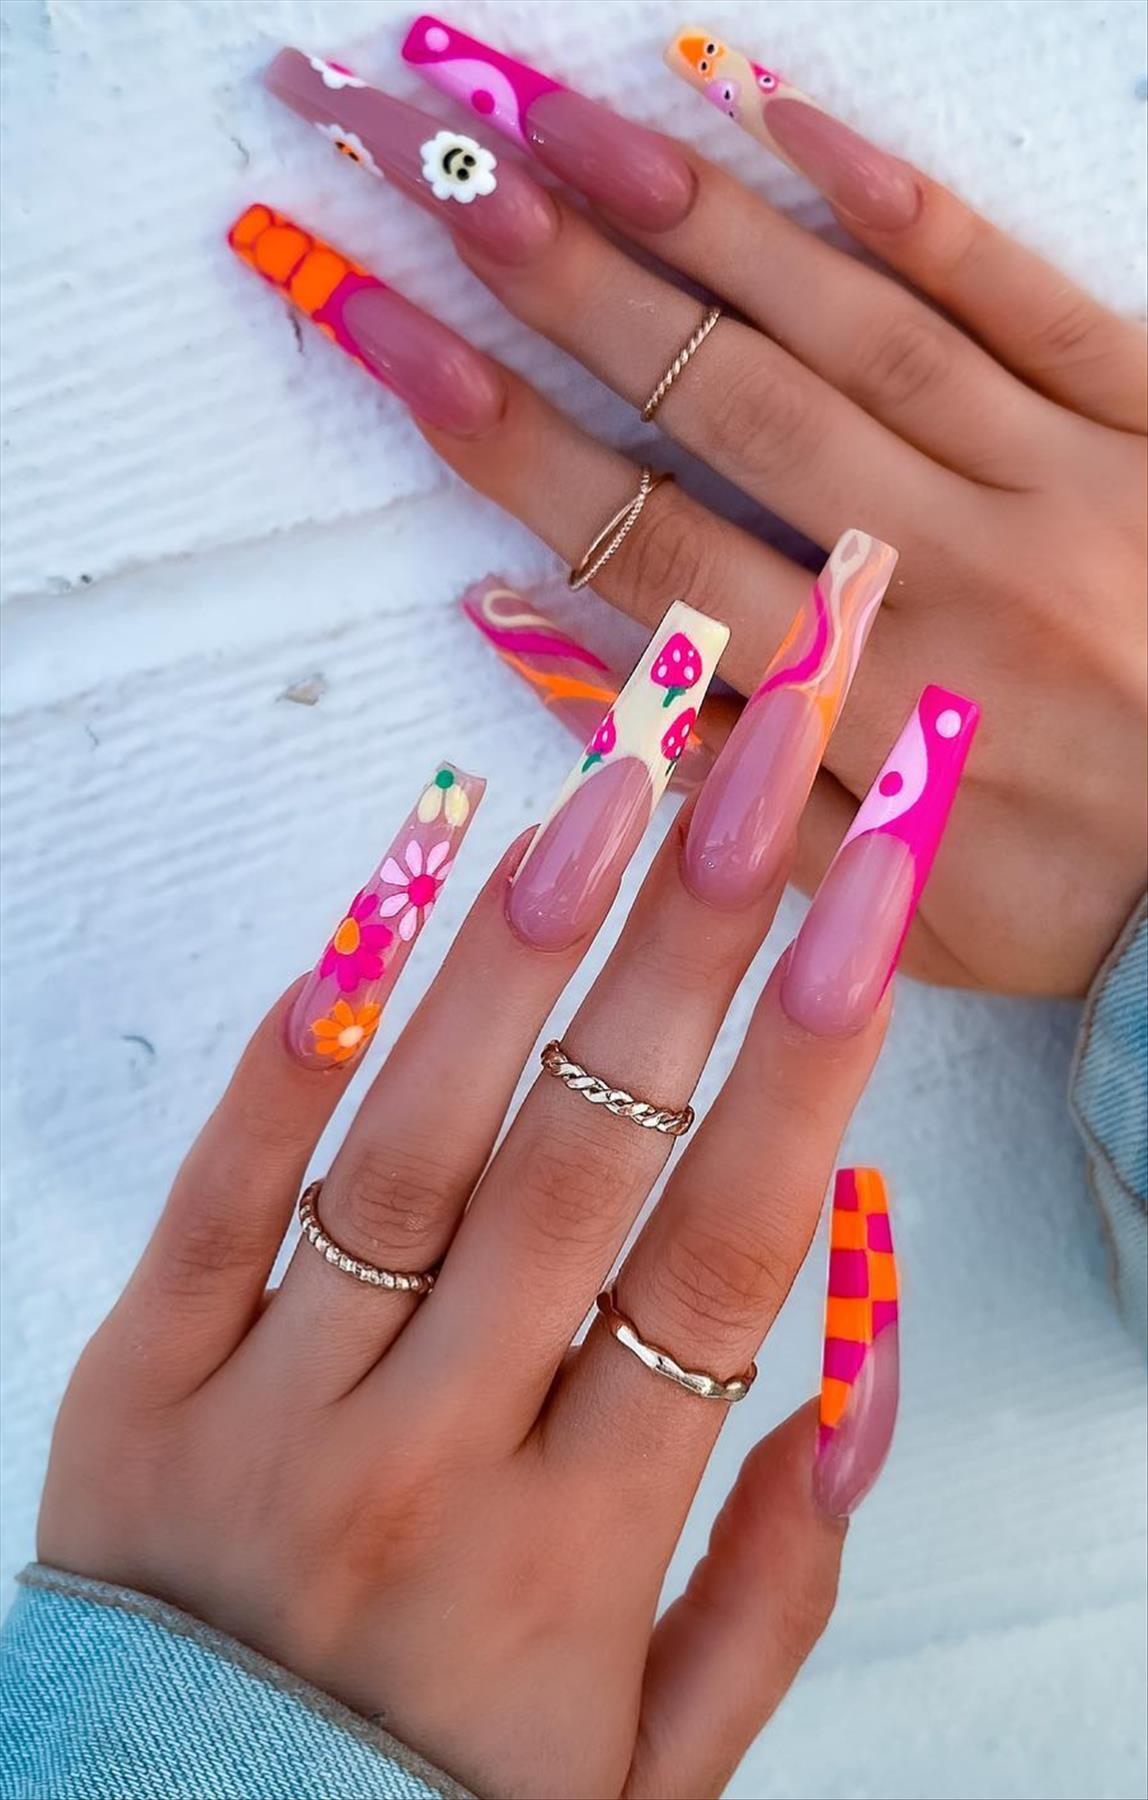 Luxury French tip coffin nails you'll flip for